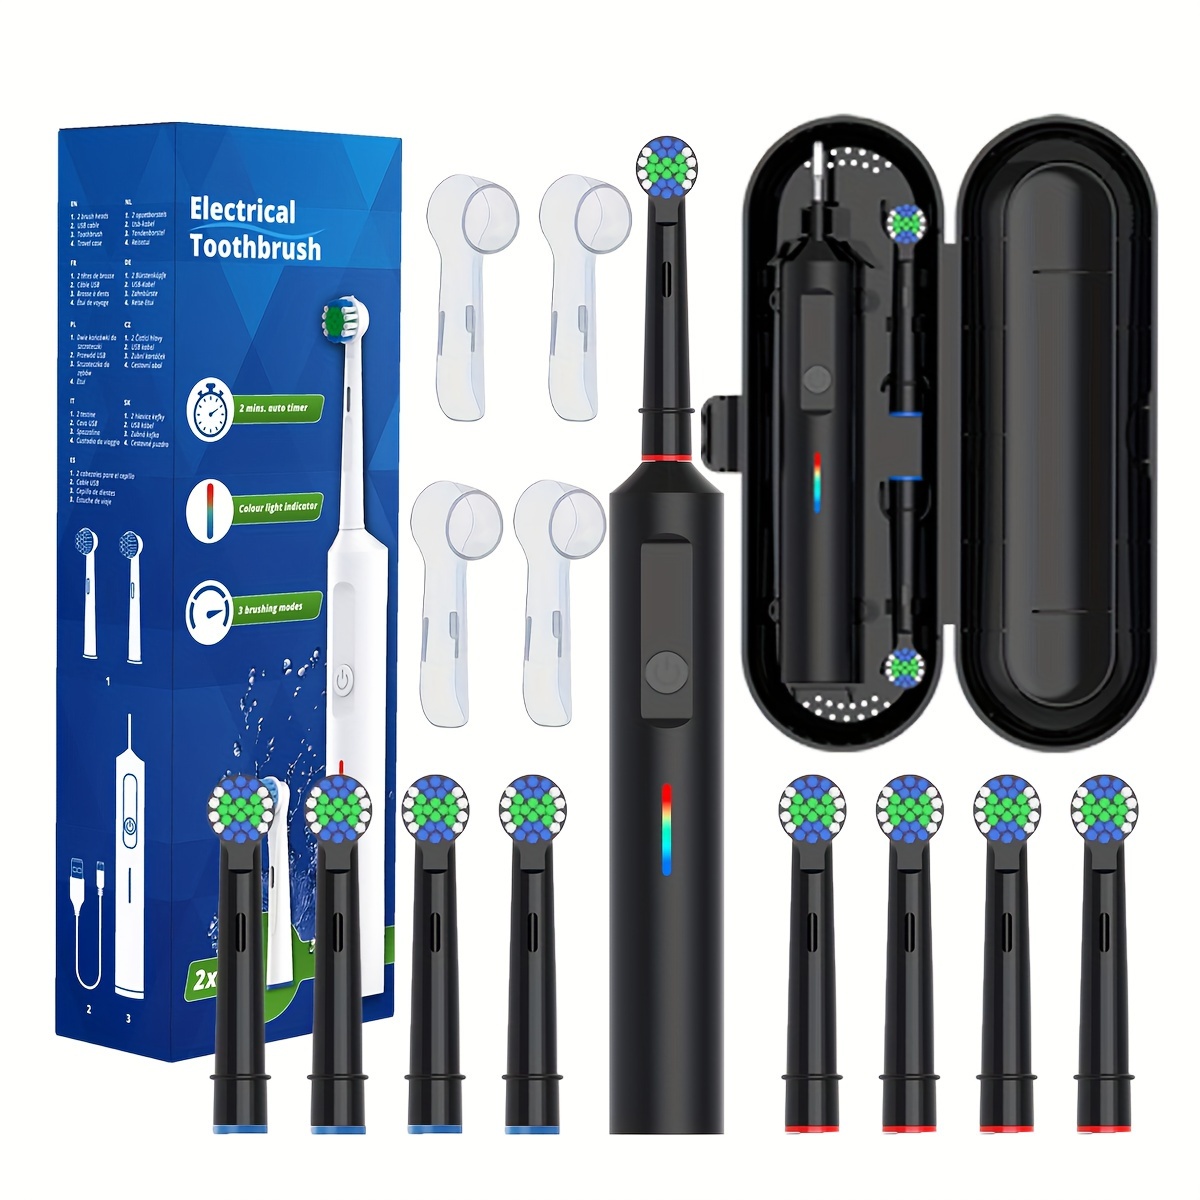 

Electric Toothbrush With Travel Case, 8 Brush Heads, 4 Modes & Usb Charging Kit, Rechargeable Power Toothbrush With Intelligent 3 Intensity Led Indicators, Oral Care